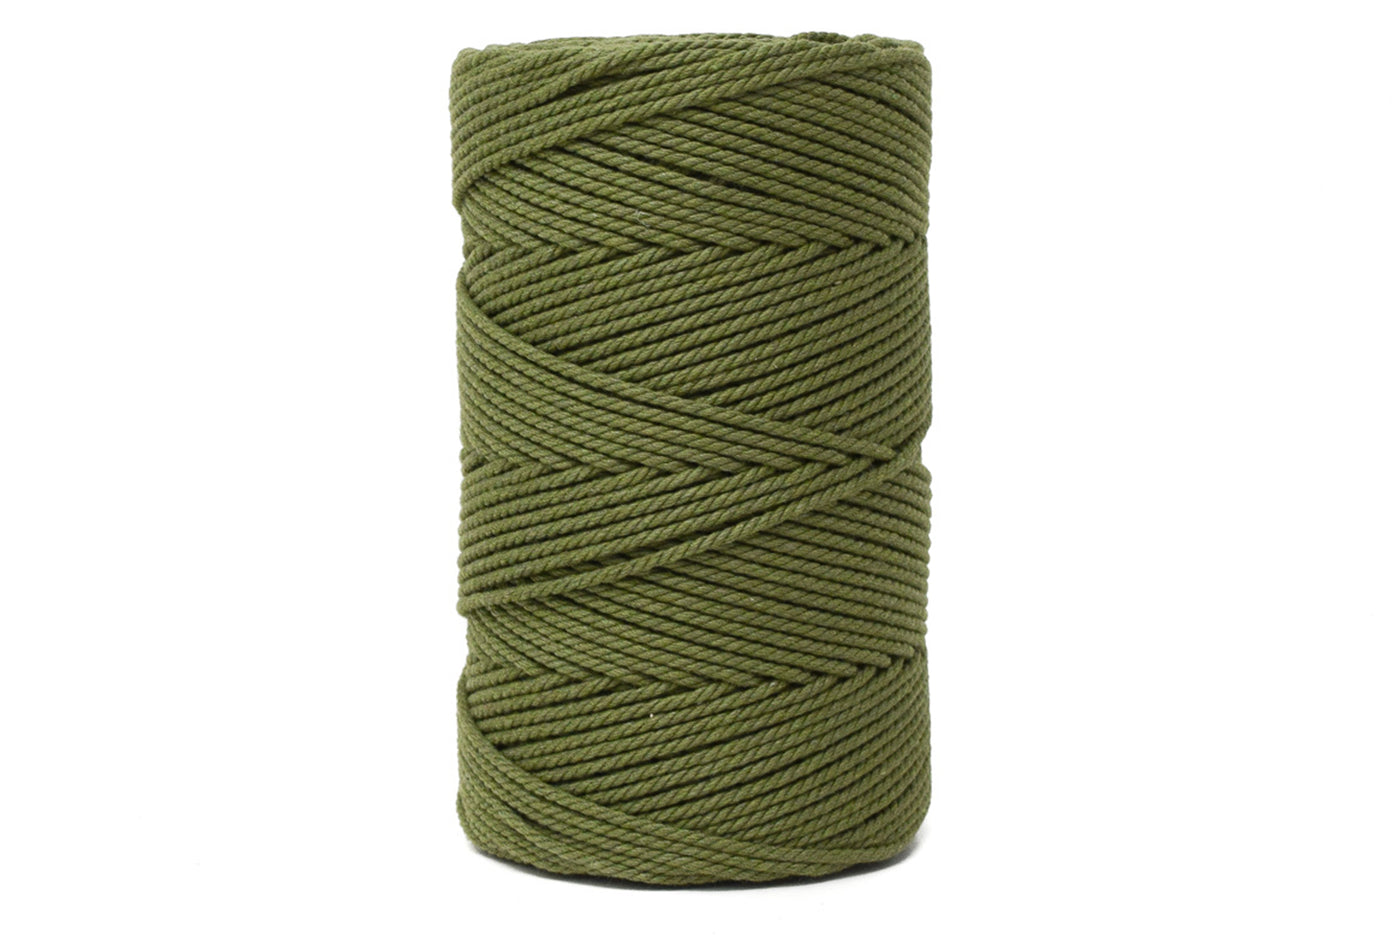 COTTON ROPE ZERO WASTE 2 MM - 3 PLY - OLIVE GREEN (NEW SHADE) COLOR